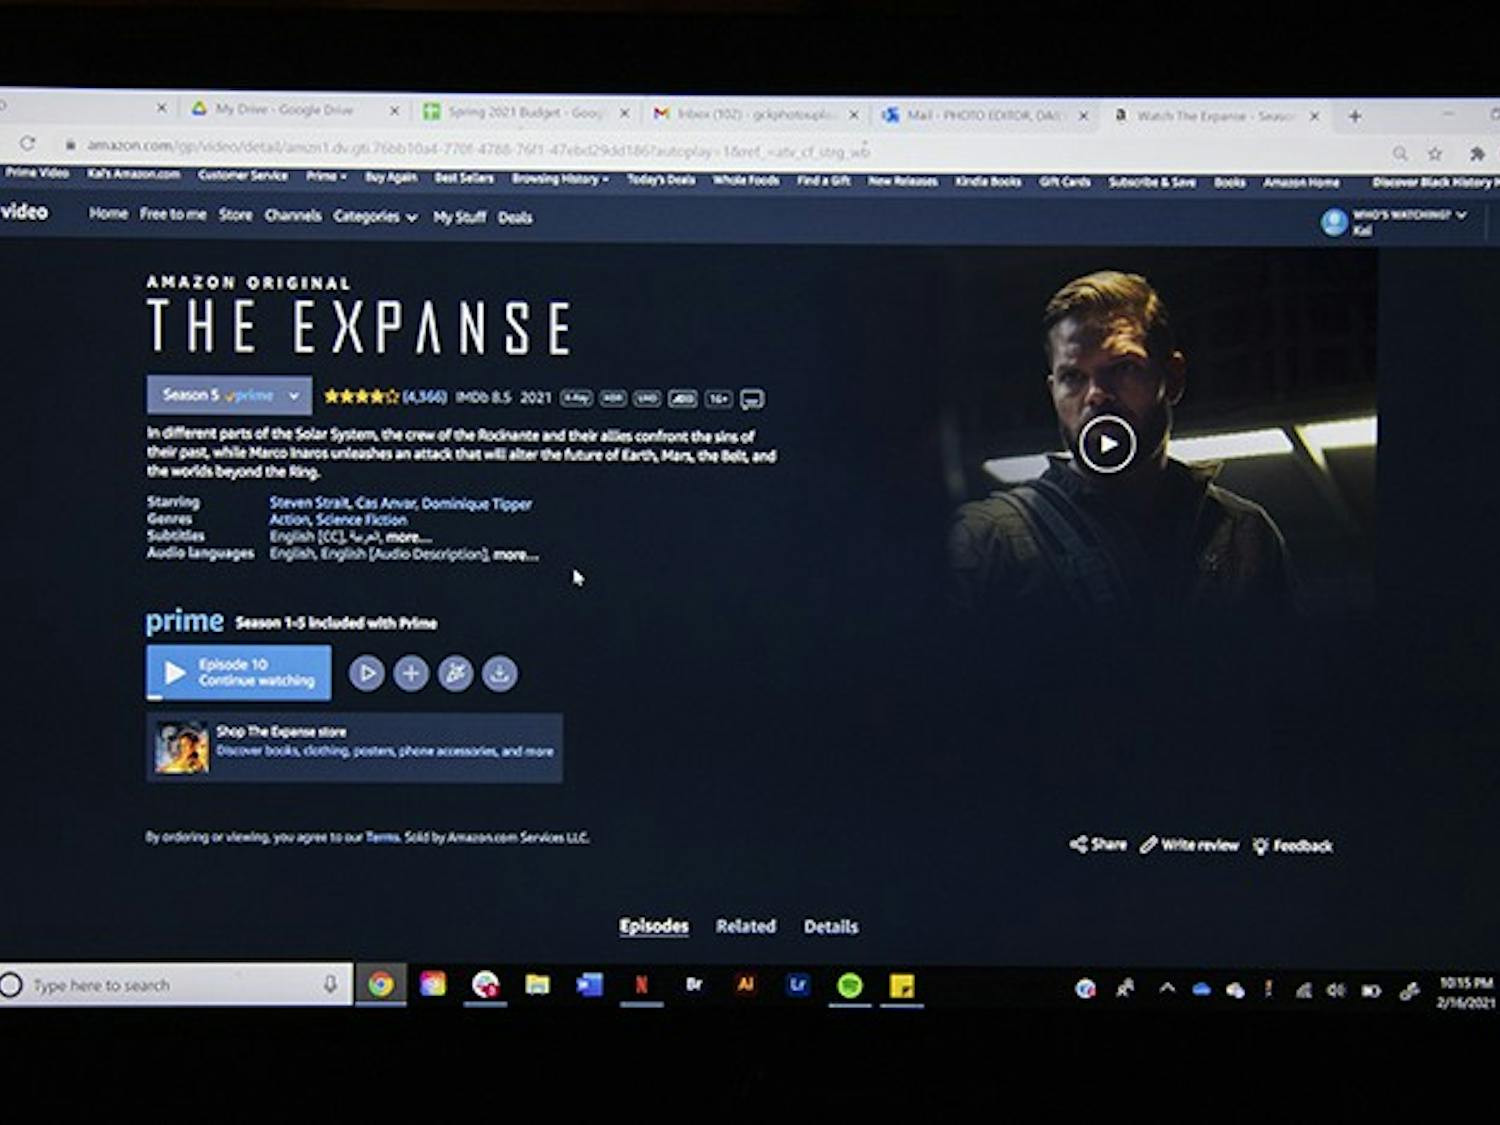 "The Expanse" is a sci-fi television show that aired on Dec. 14, 2015. The show can be watched on Amazon Prime.